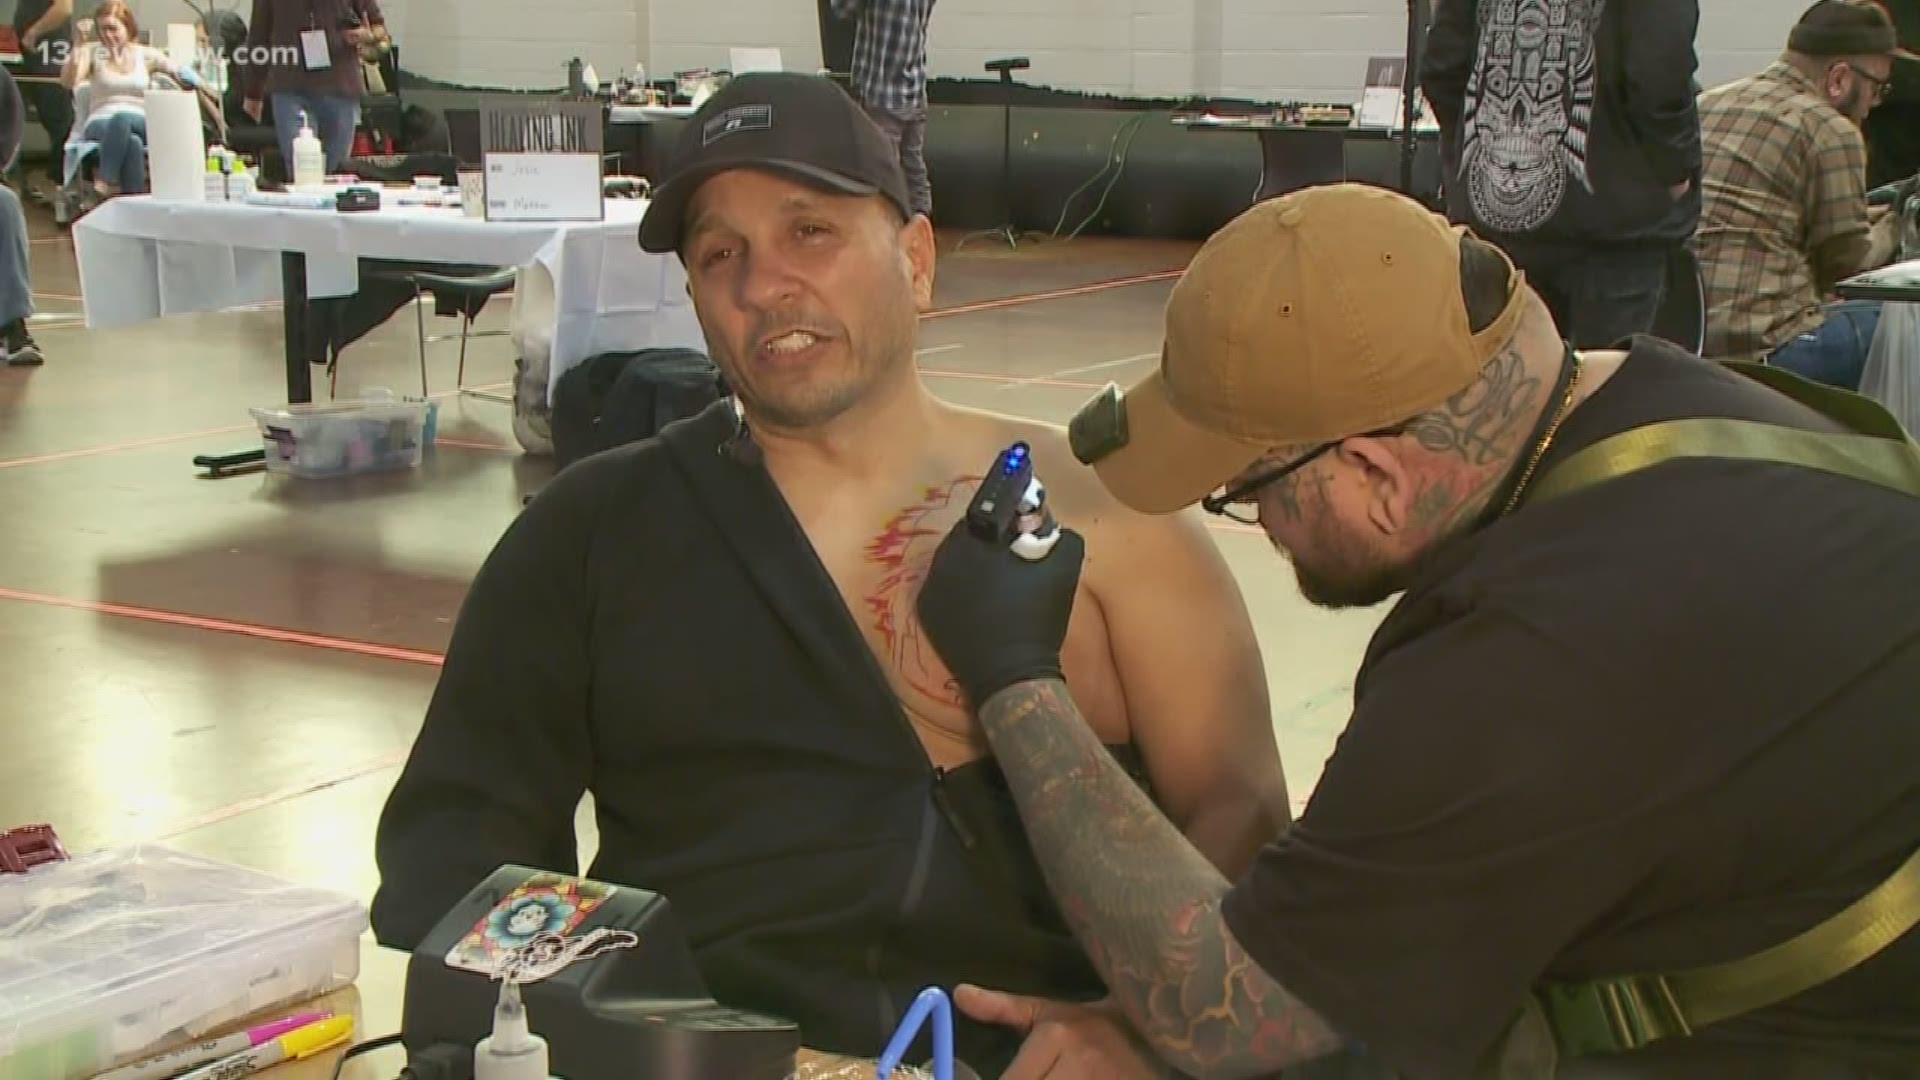 Many people in the community are healing after the mass shooting at the Virginia Beach Municipal Center. Tattoo artists are coming in to transform the scars.